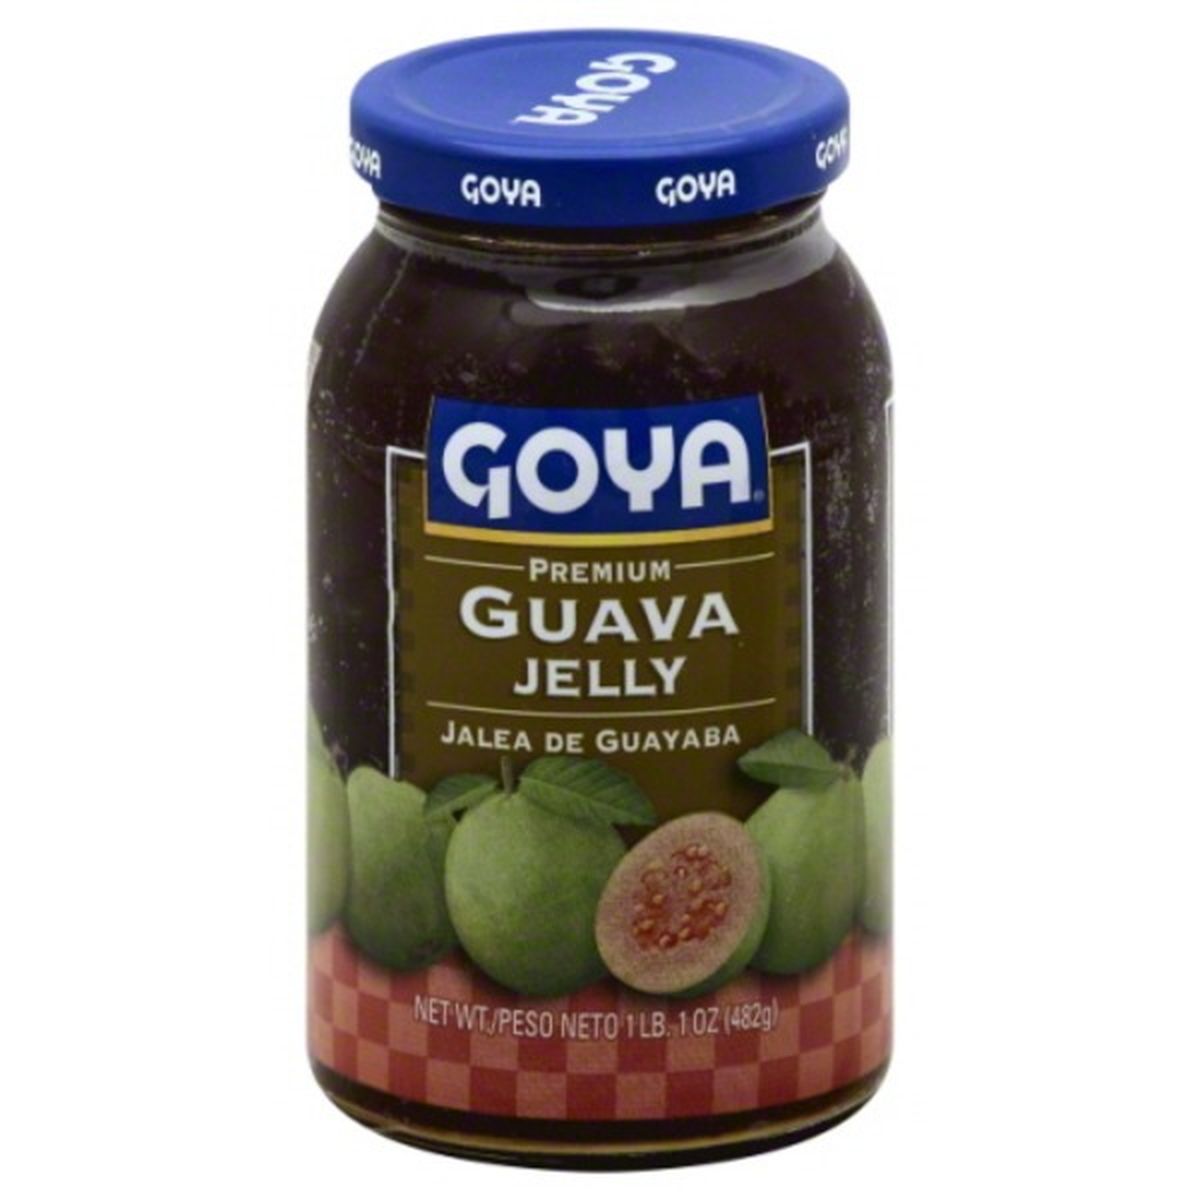 Calories in Goya Jelly, Guava